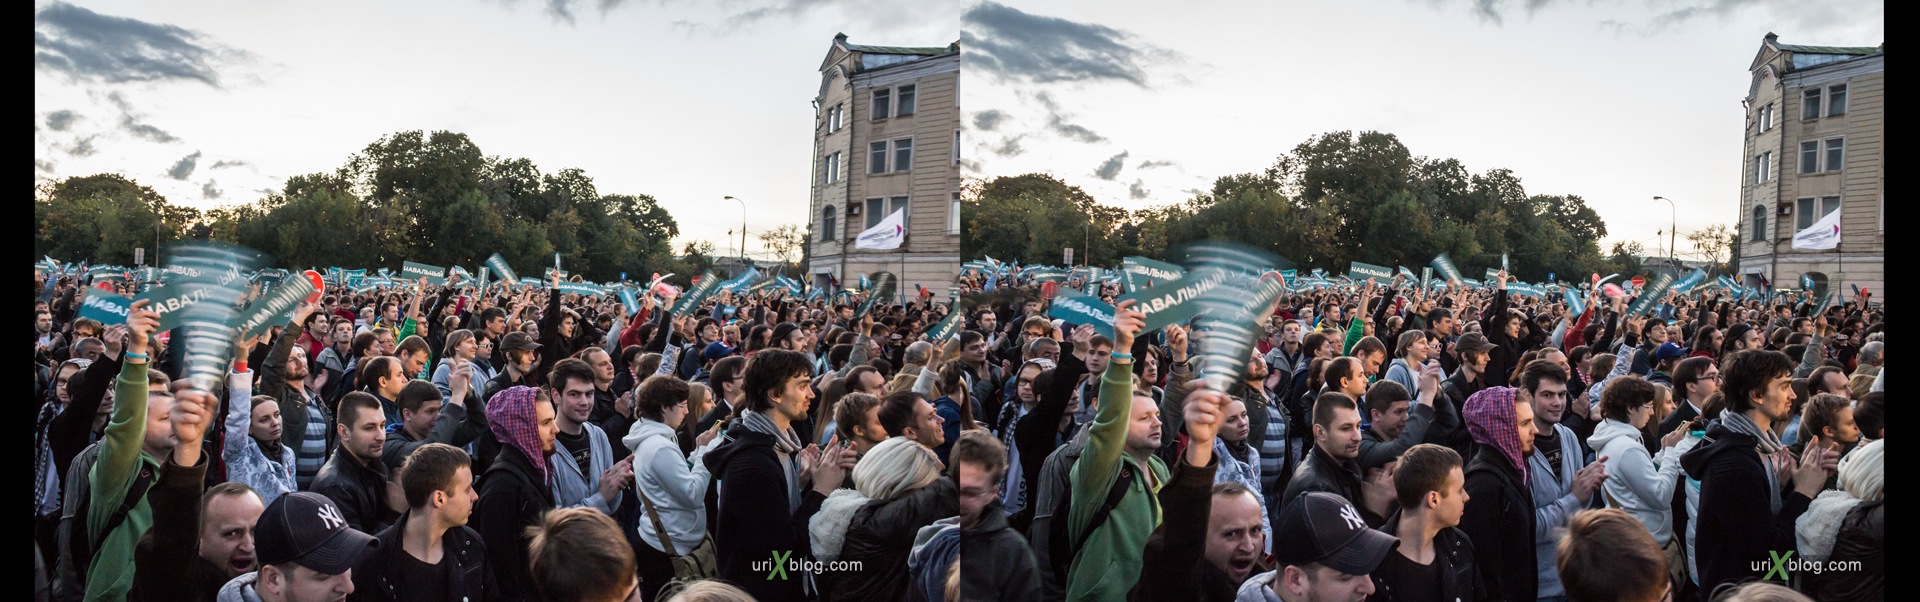 2013, Russia, Moscow, meeting, rally, elections, Aleksei Navalny, people, 3D, stereo pair, cross-eyed, crossview, cross view stereo pair, stereoscopic